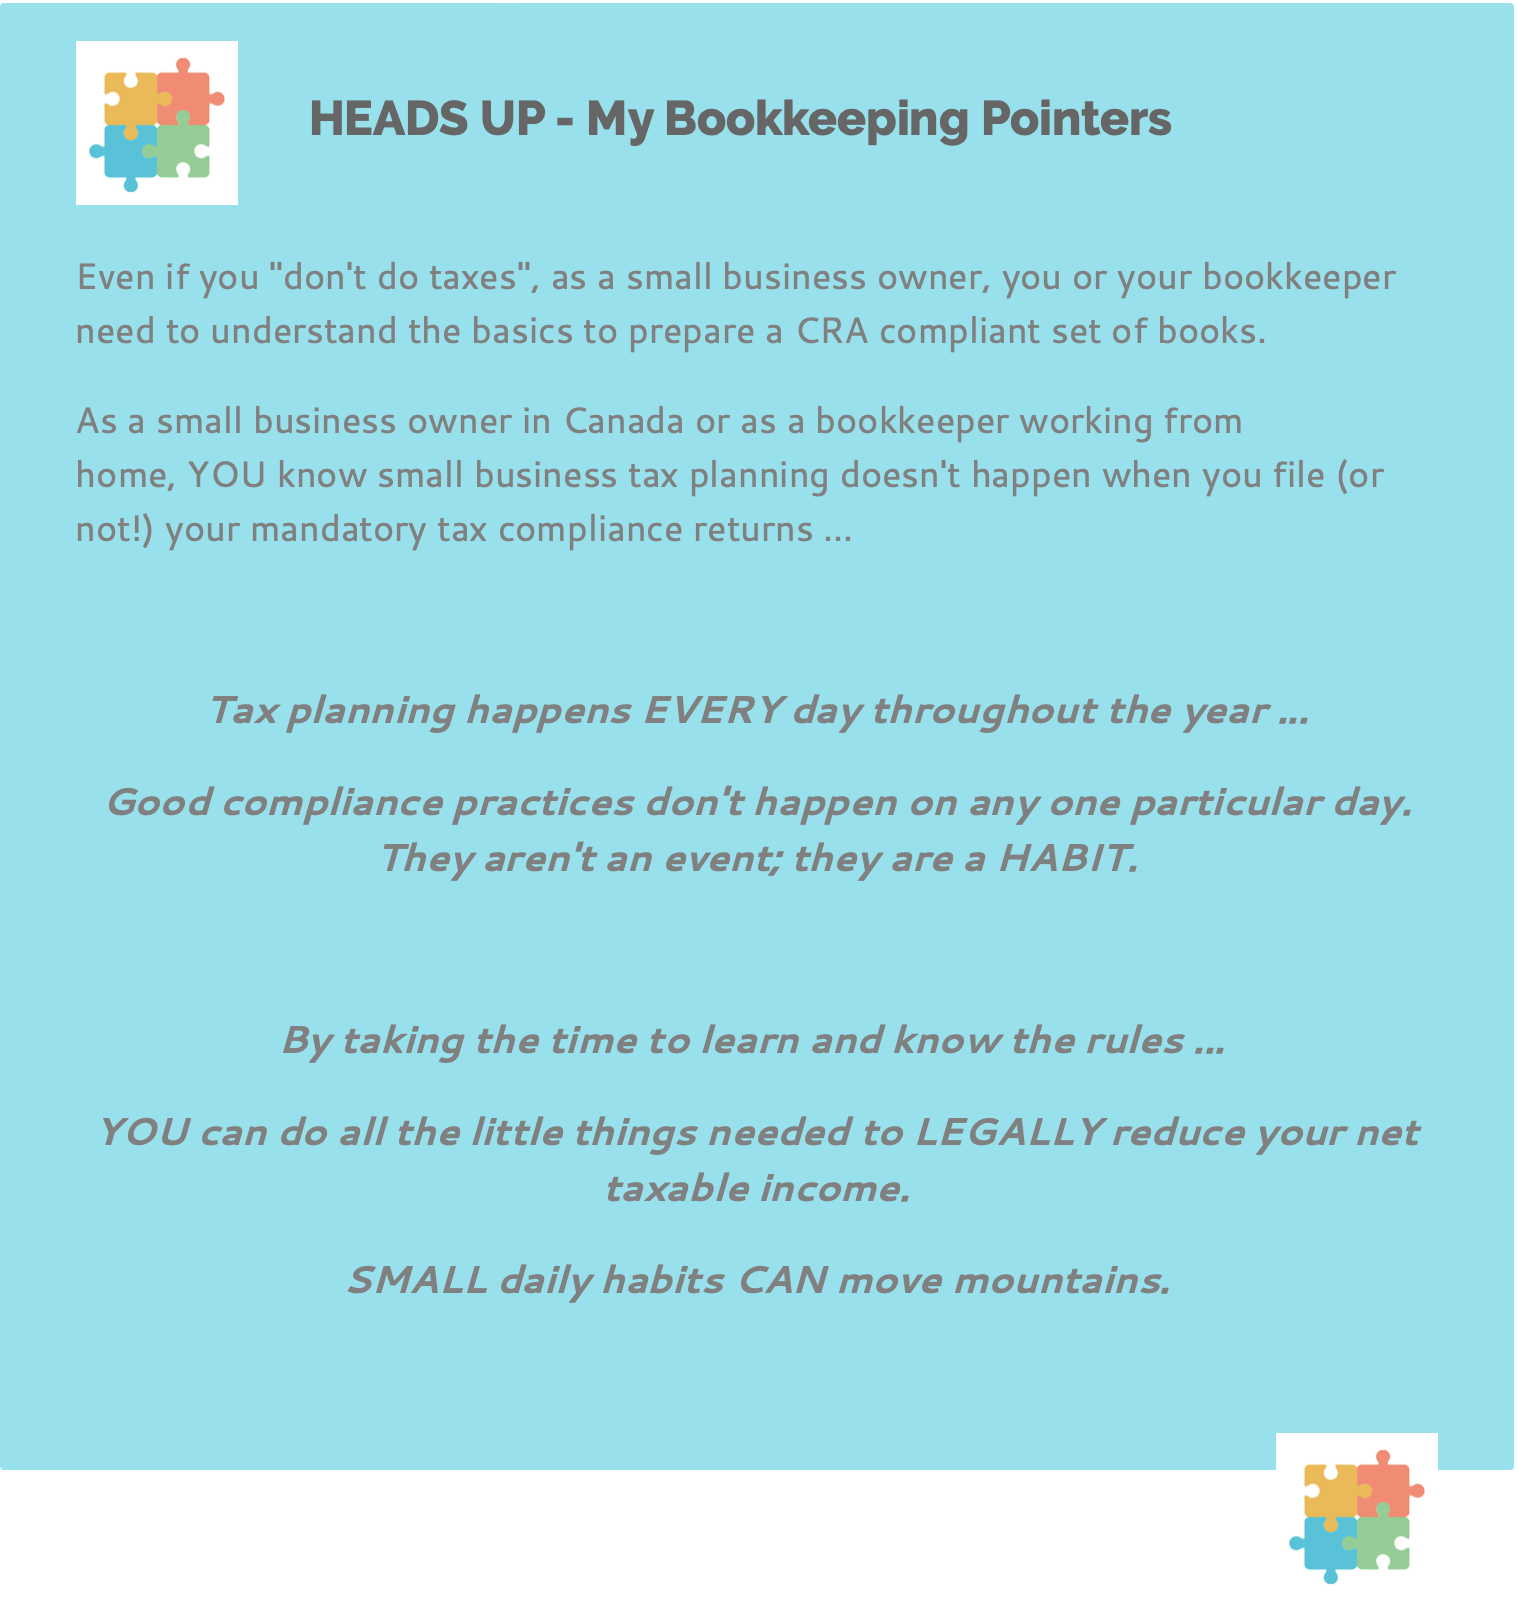 Head Up - My Bookkeeping Pointers